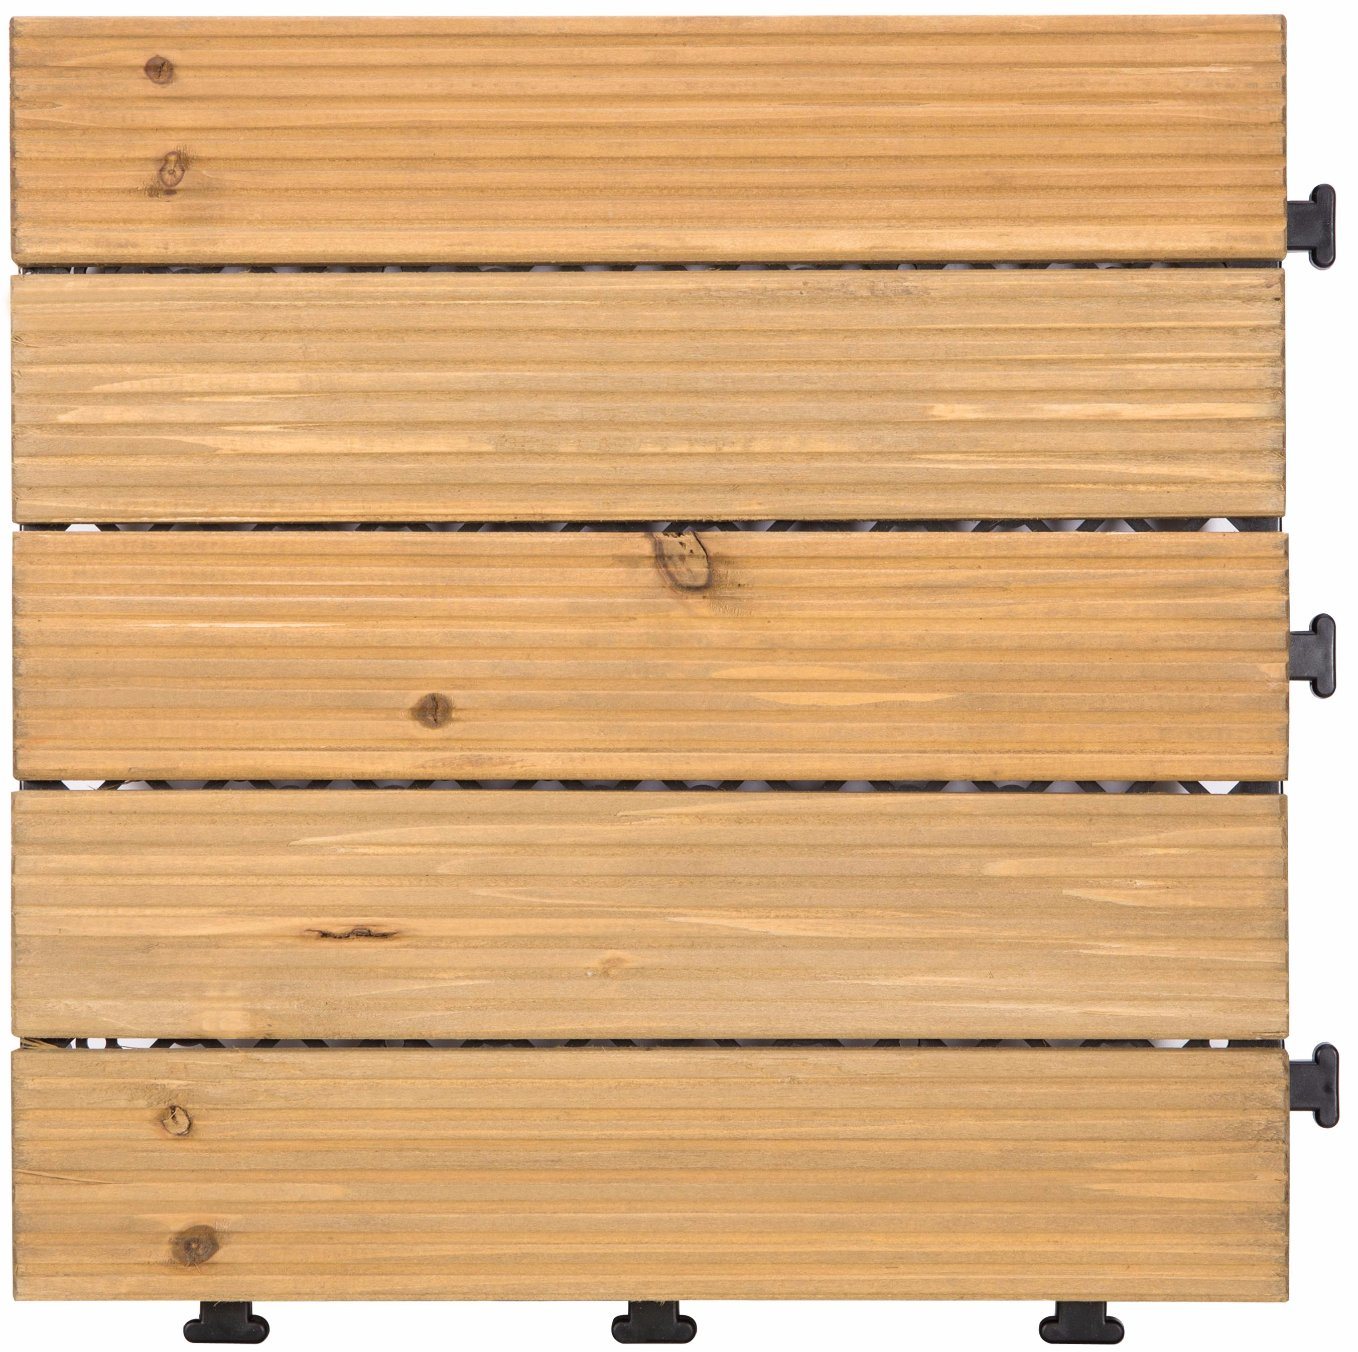 Removeable Outdoor Wood Flooring Tile with PE Base